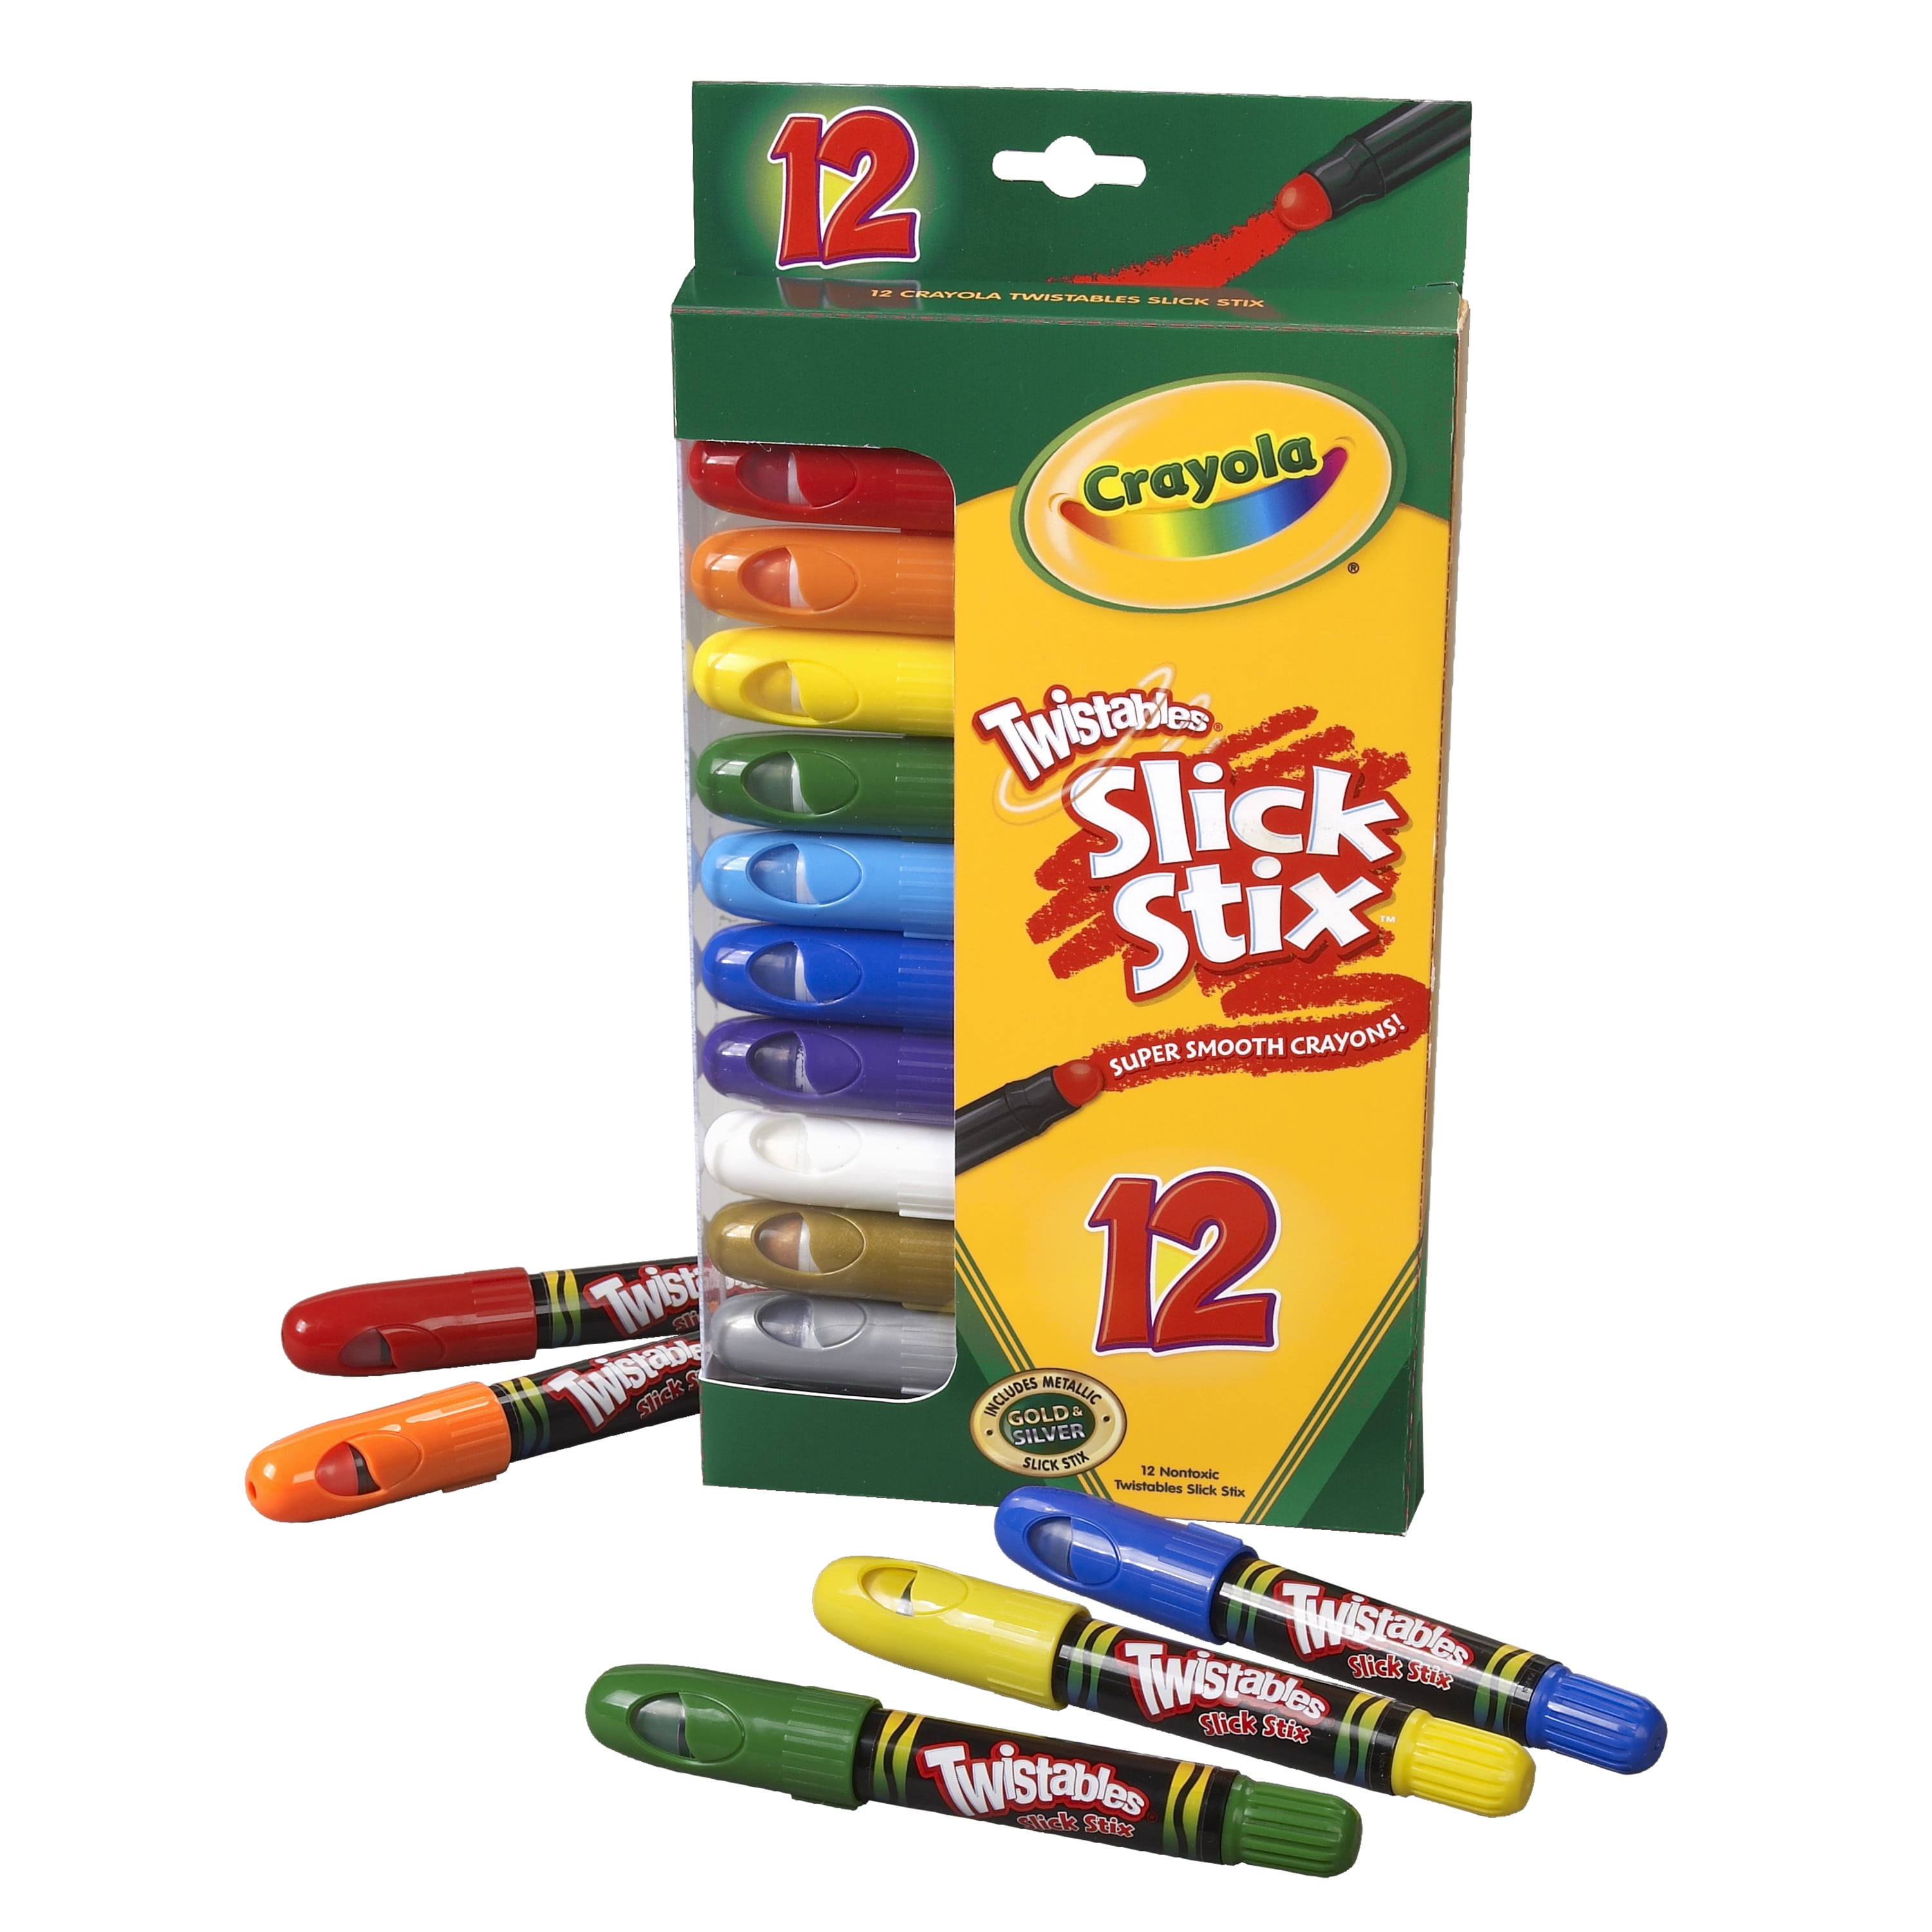  Crayola Twistables Colored Pencil Set (50ct), Kids Art  Supplies, Colored Pencils For Kids, Unique Holiday Gifts, Stocking  Stuffers, 4+ [ Exclusive] : Toys & Games